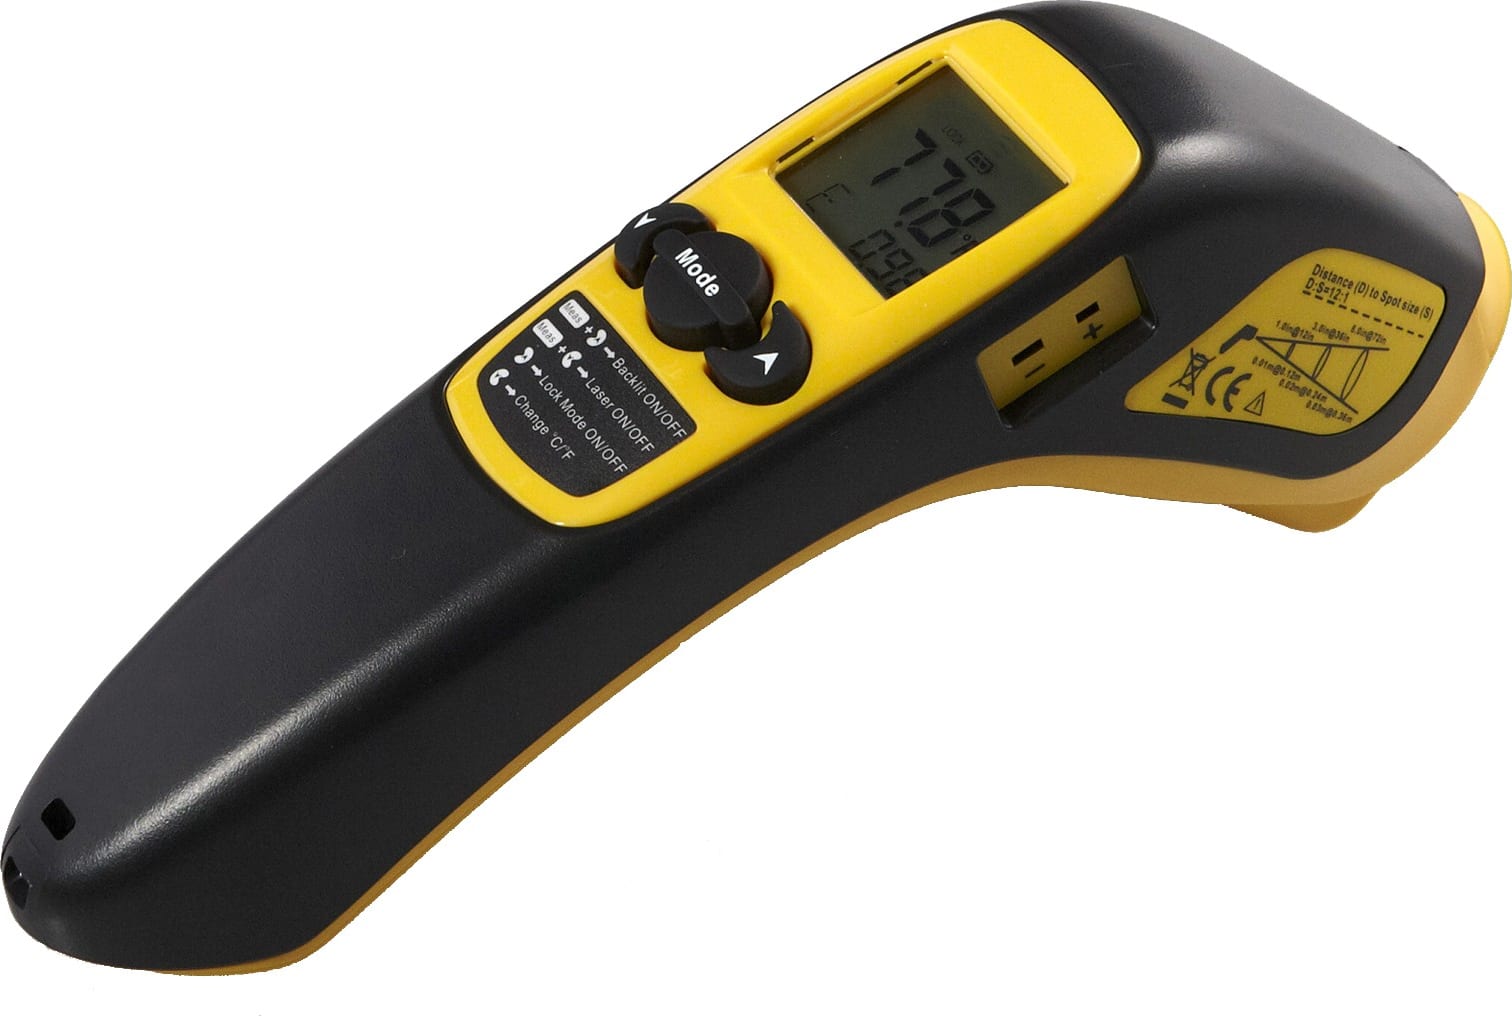 CPS TMINI12 - 12:1 Infrared Thermometer with Adjustable Emissivity and Laser  Sight